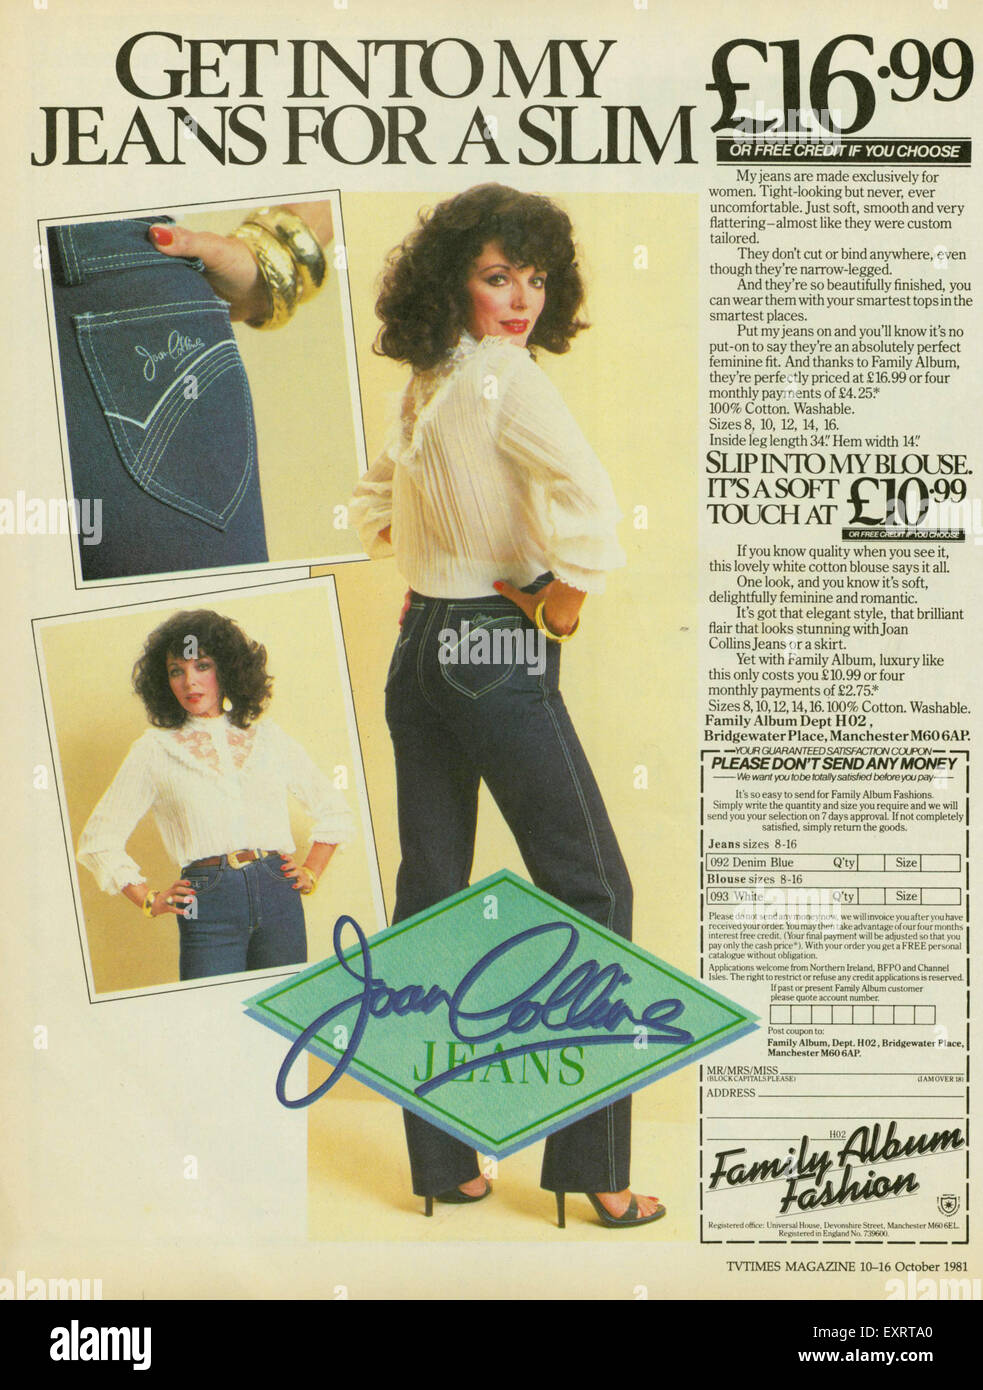 80s Jeans Are Back, and We Found the Outfits to Prove It